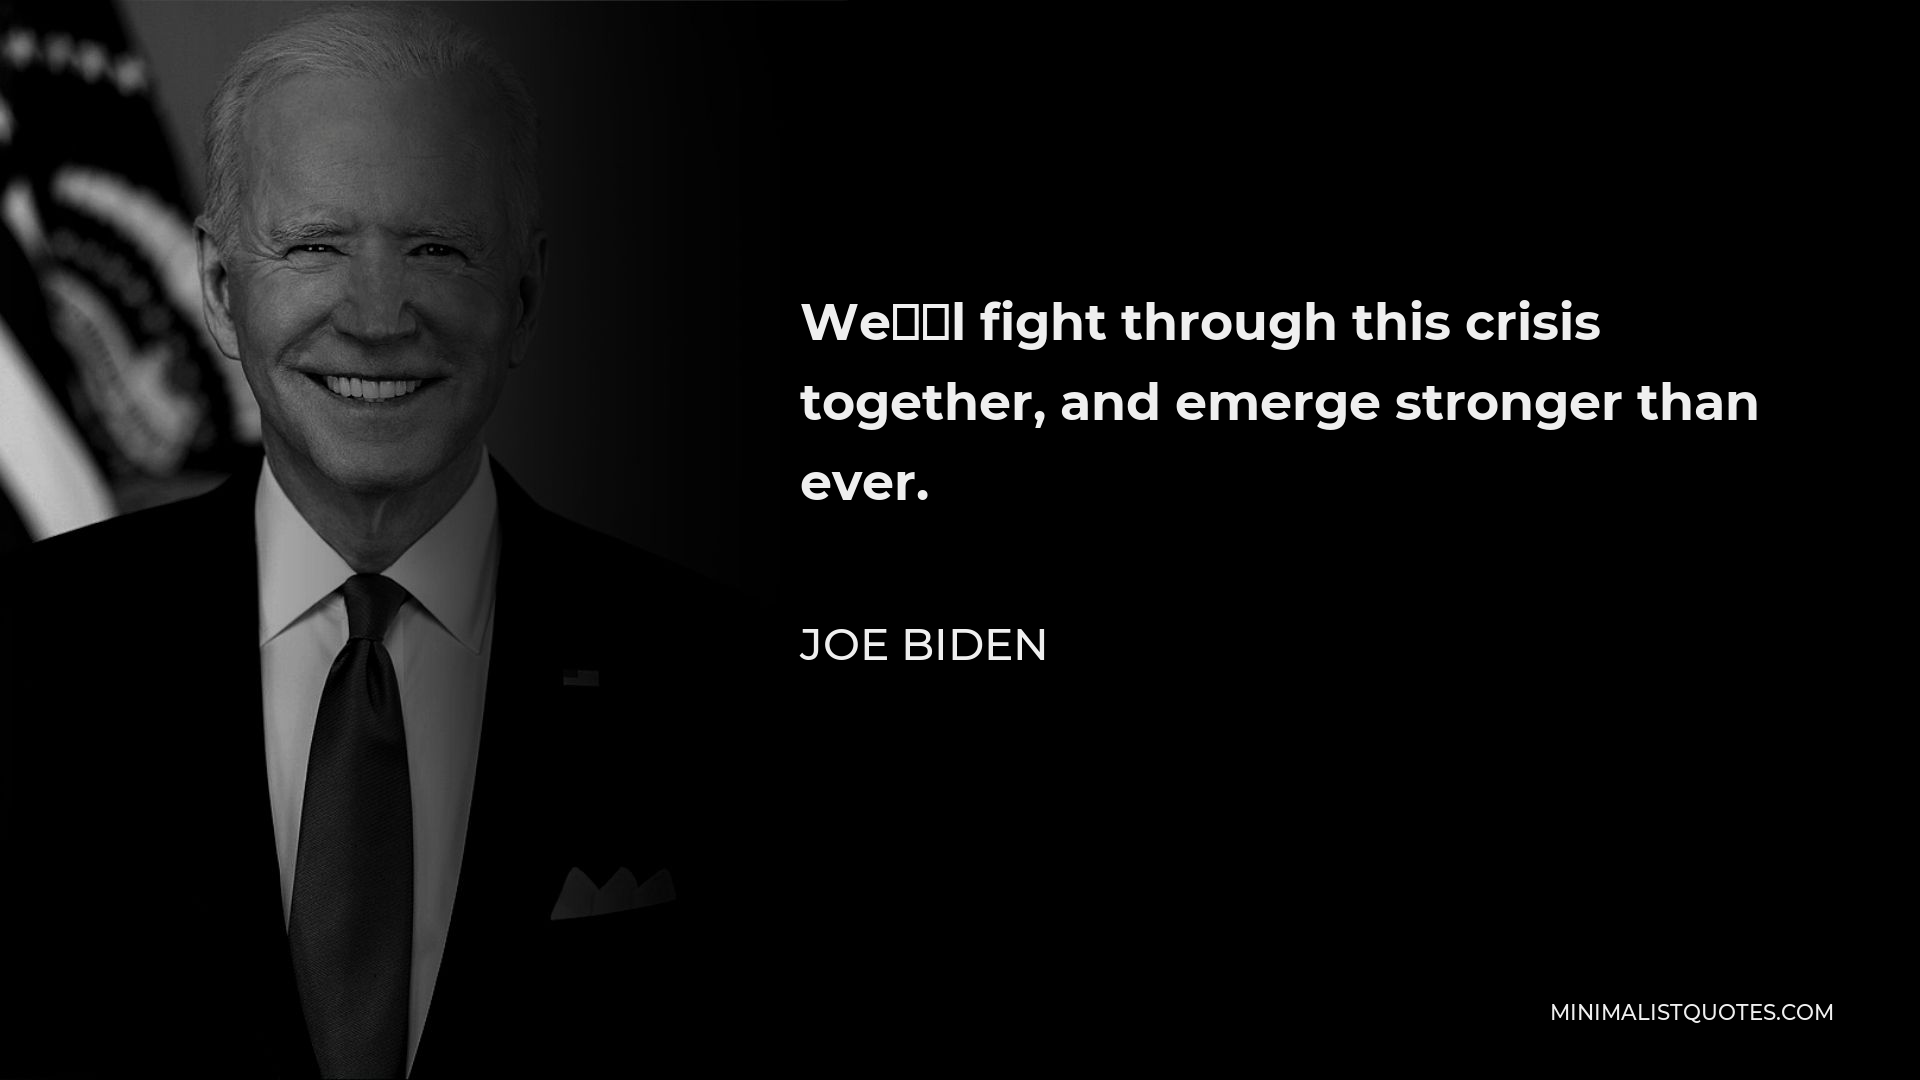 Joe Biden Quote - We’ll fight through this crisis together, and emerge stronger than ever.